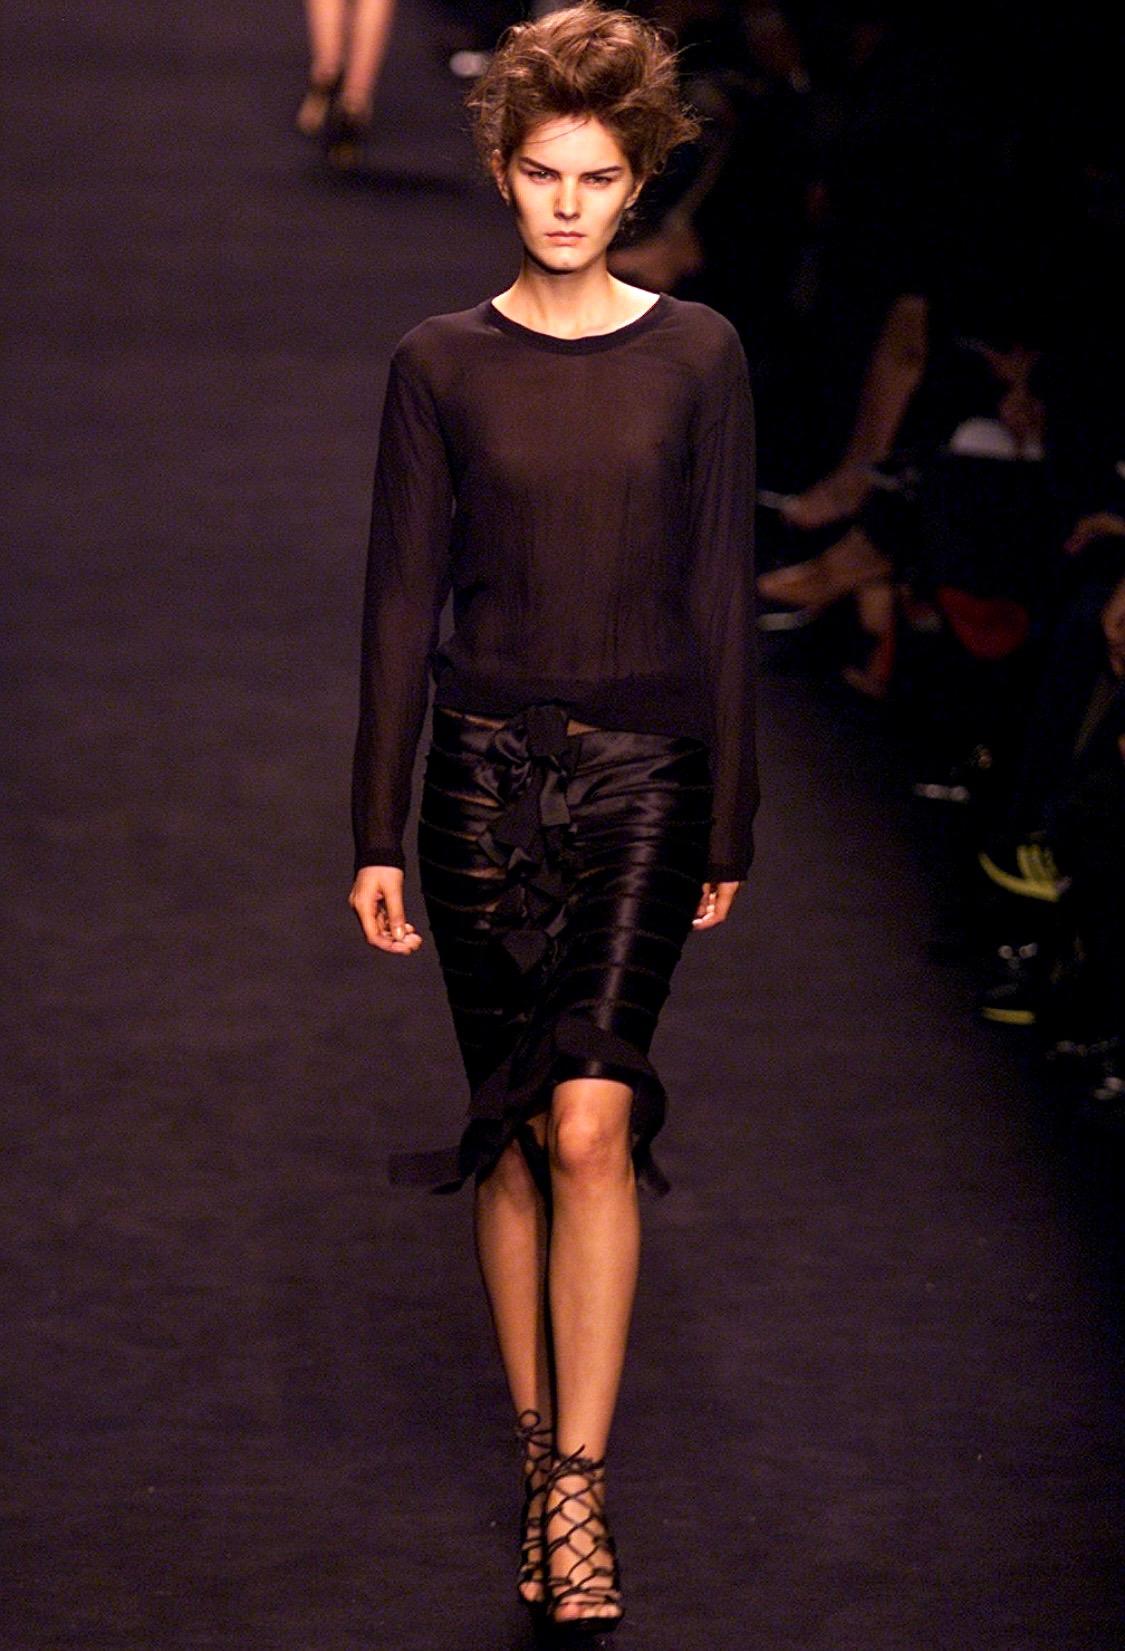 Presenting a ribbon and mesh black satin bow skirt designed by Tom Ford for Yves Saint Laurent Rive Gauche's Fall/Winter 2002 collection. Debuting as part of look 16 on Marcelle Bittar, this piece features strips of black silk ribbon sewn onto black